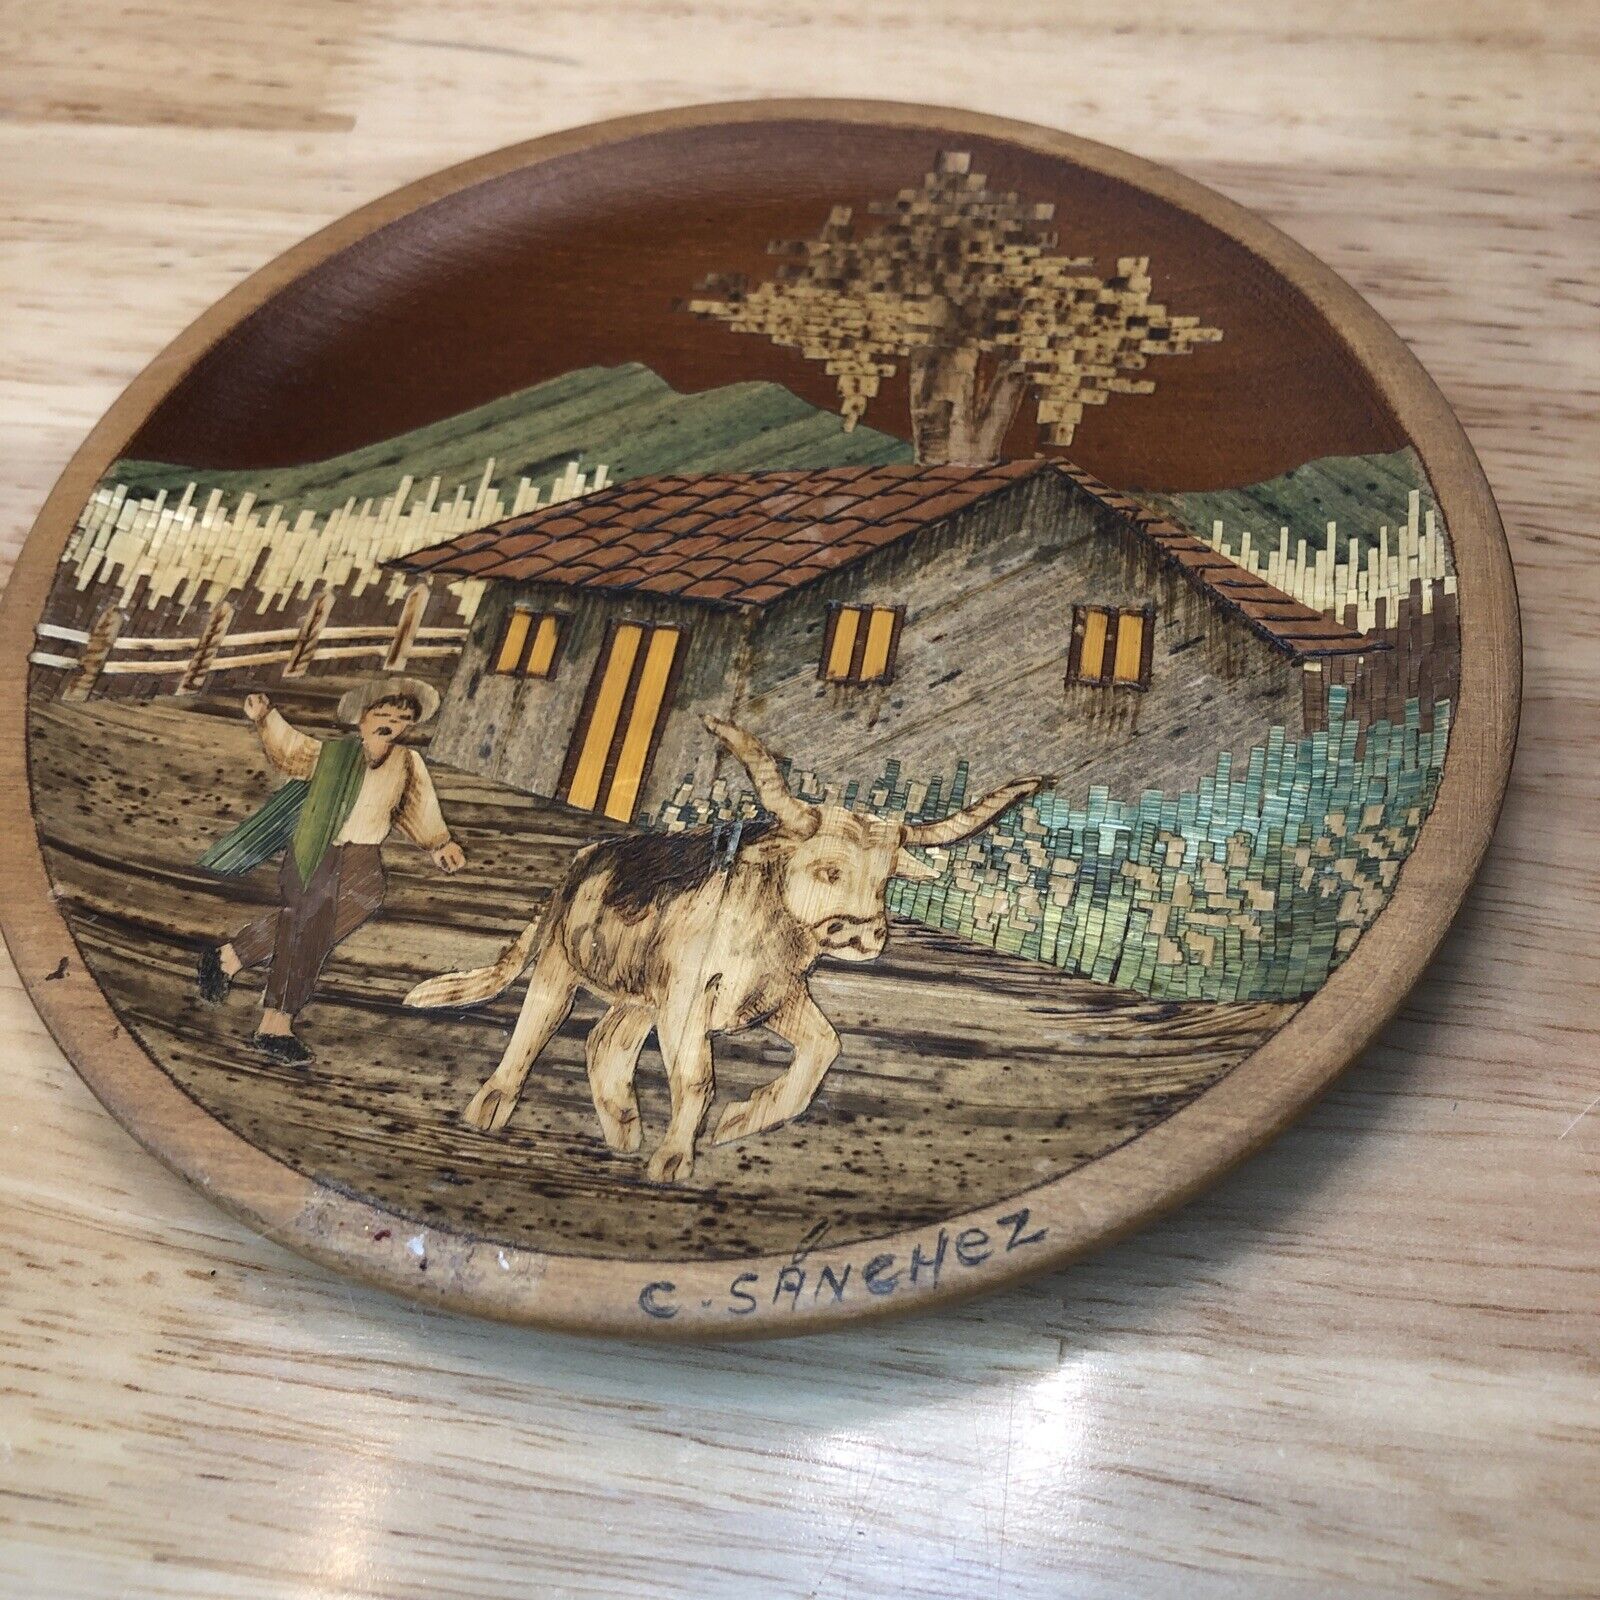 Carved wooden plate - artwork of countryside barn farmer and bull by C. Sanchez